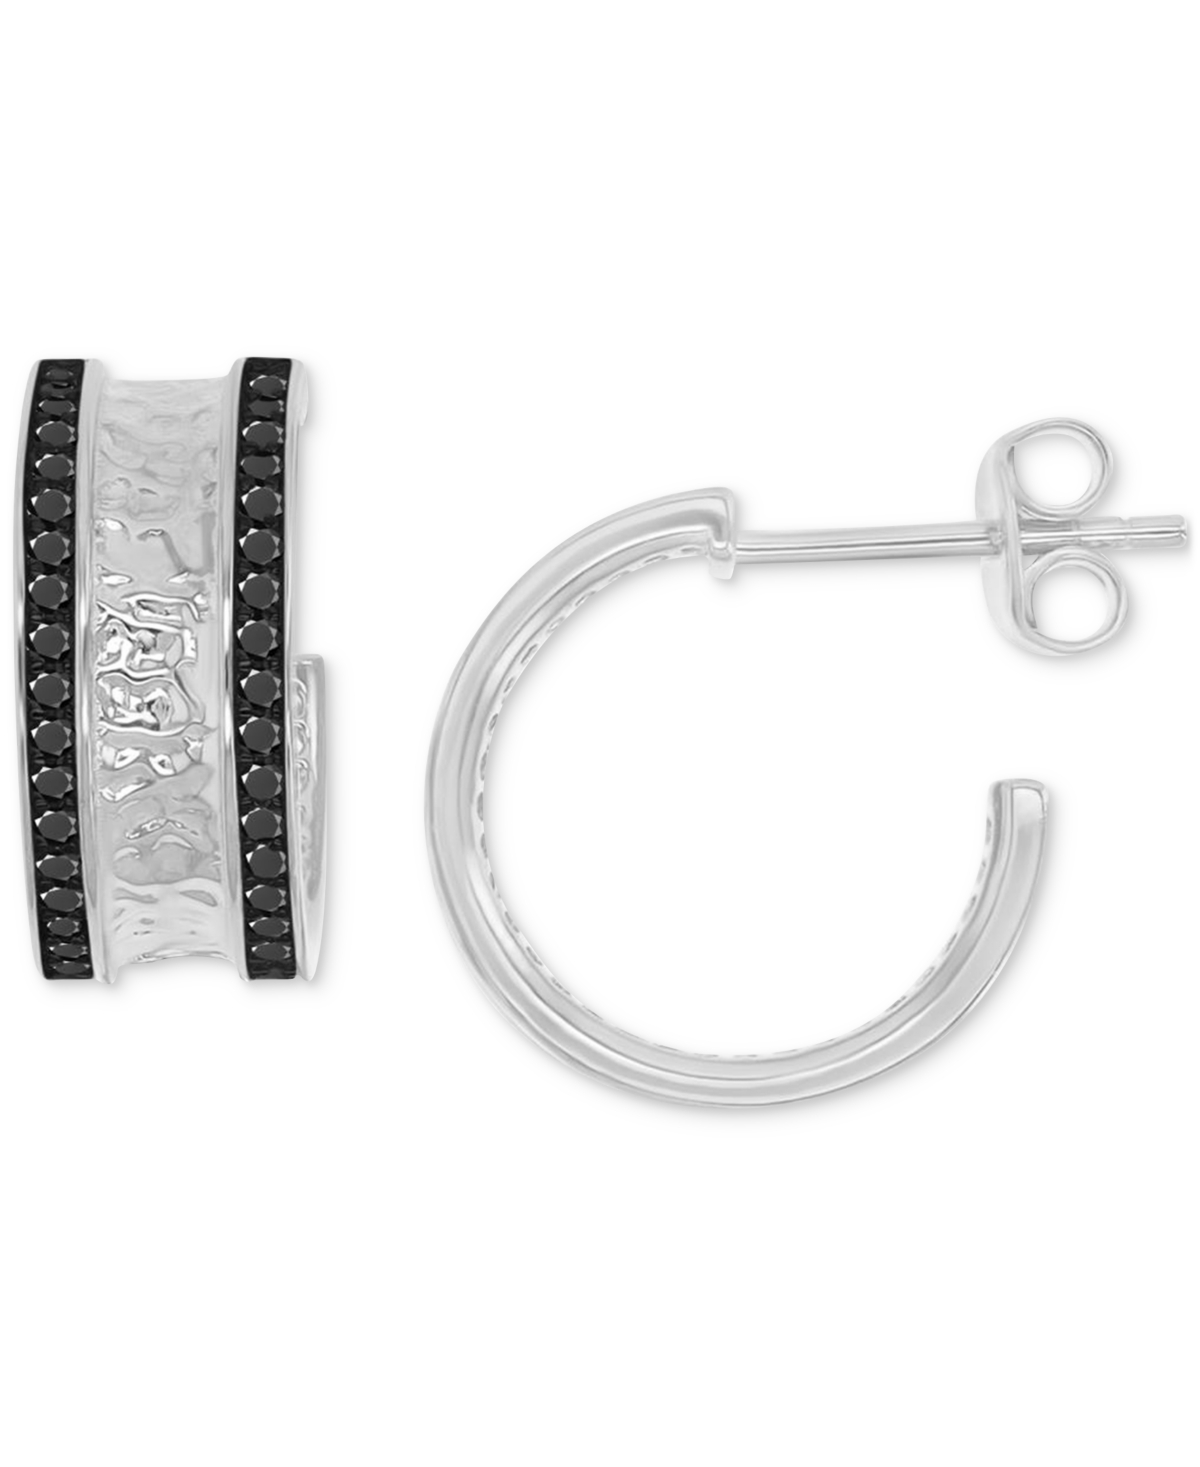 Black Spinel Hammered Texture Small Hoop Earrings (3/4 ct. t.w.) in Sterling Silver, 0.55" - Black Spinel